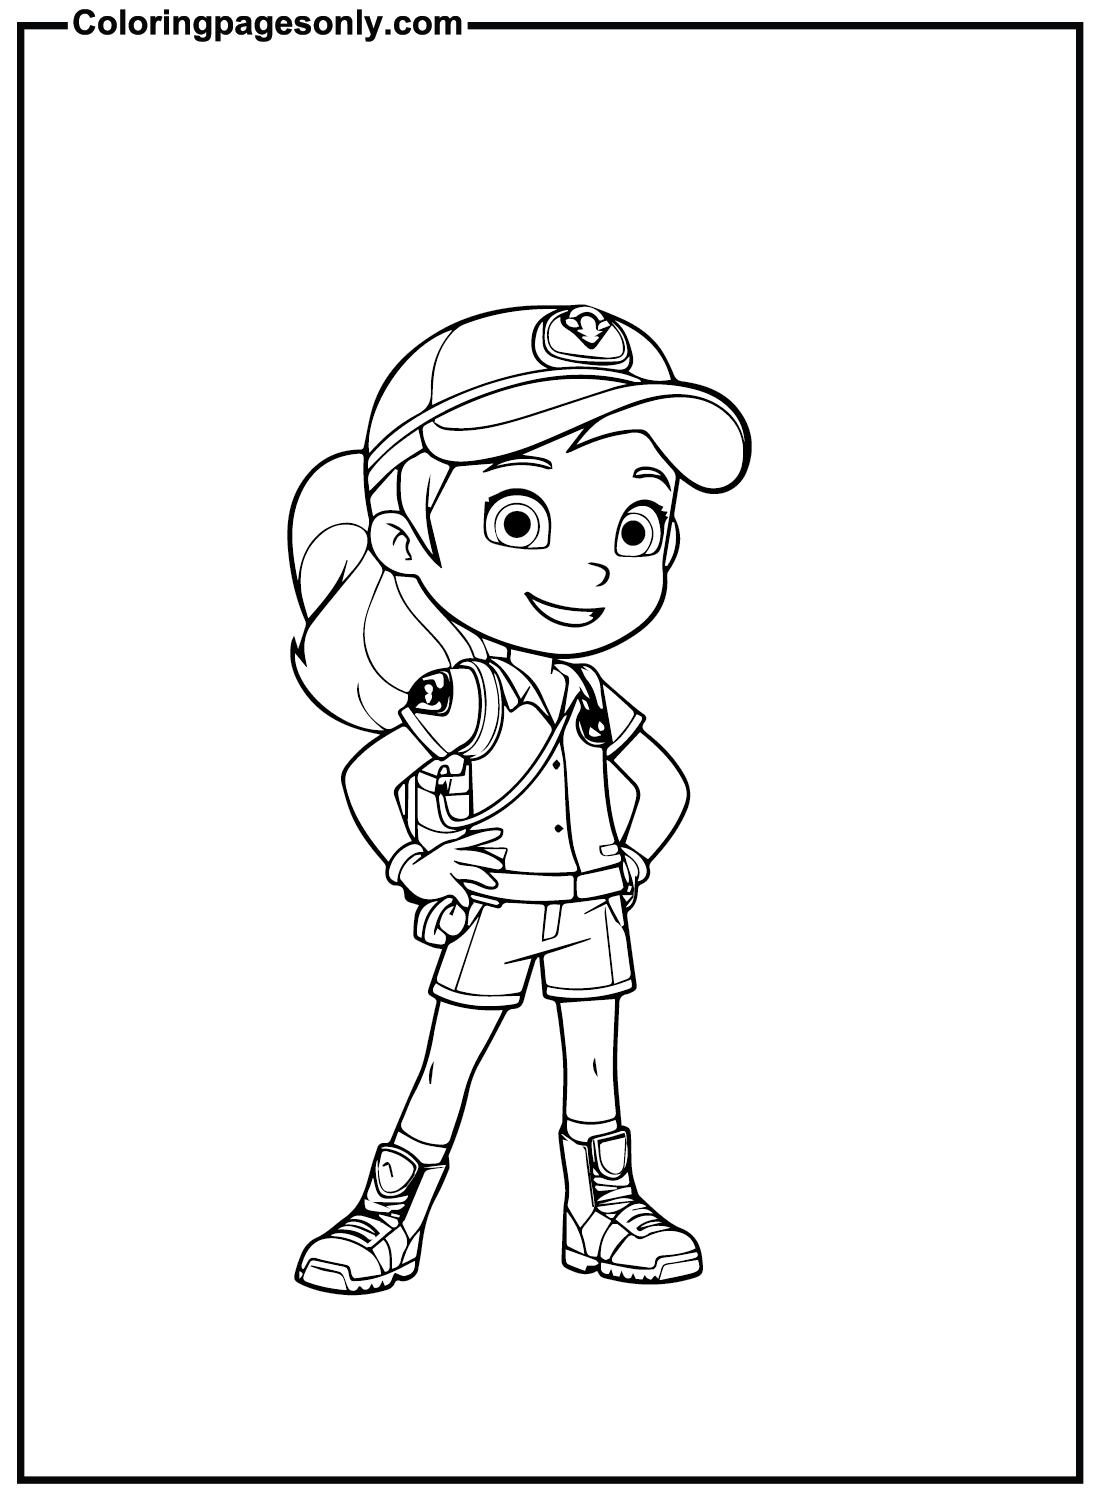 Print Rainbow Rangers Coloring Pages